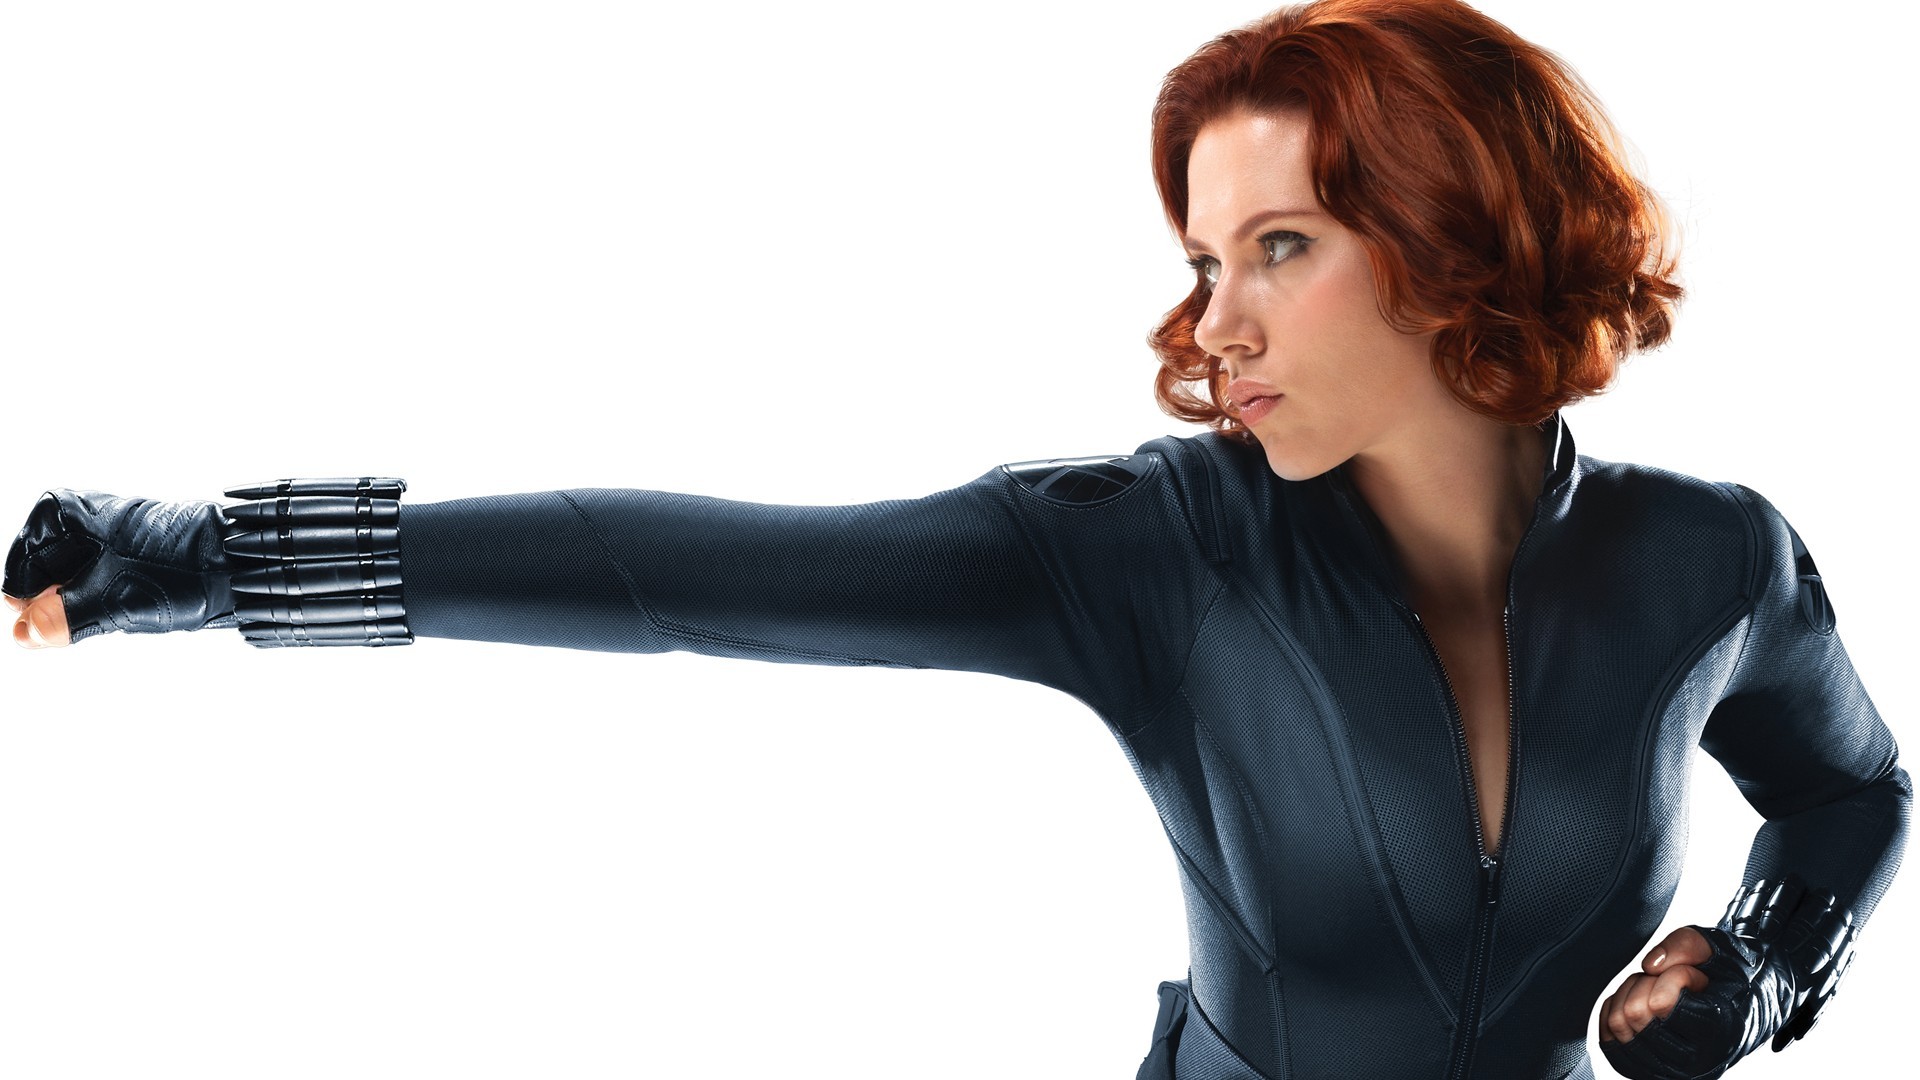 People 1920x1080 movies The Avengers Black Widow Scarlett Johansson superheroines Marvel Cinematic Universe women simple background white background redhead actress Marvel Girl